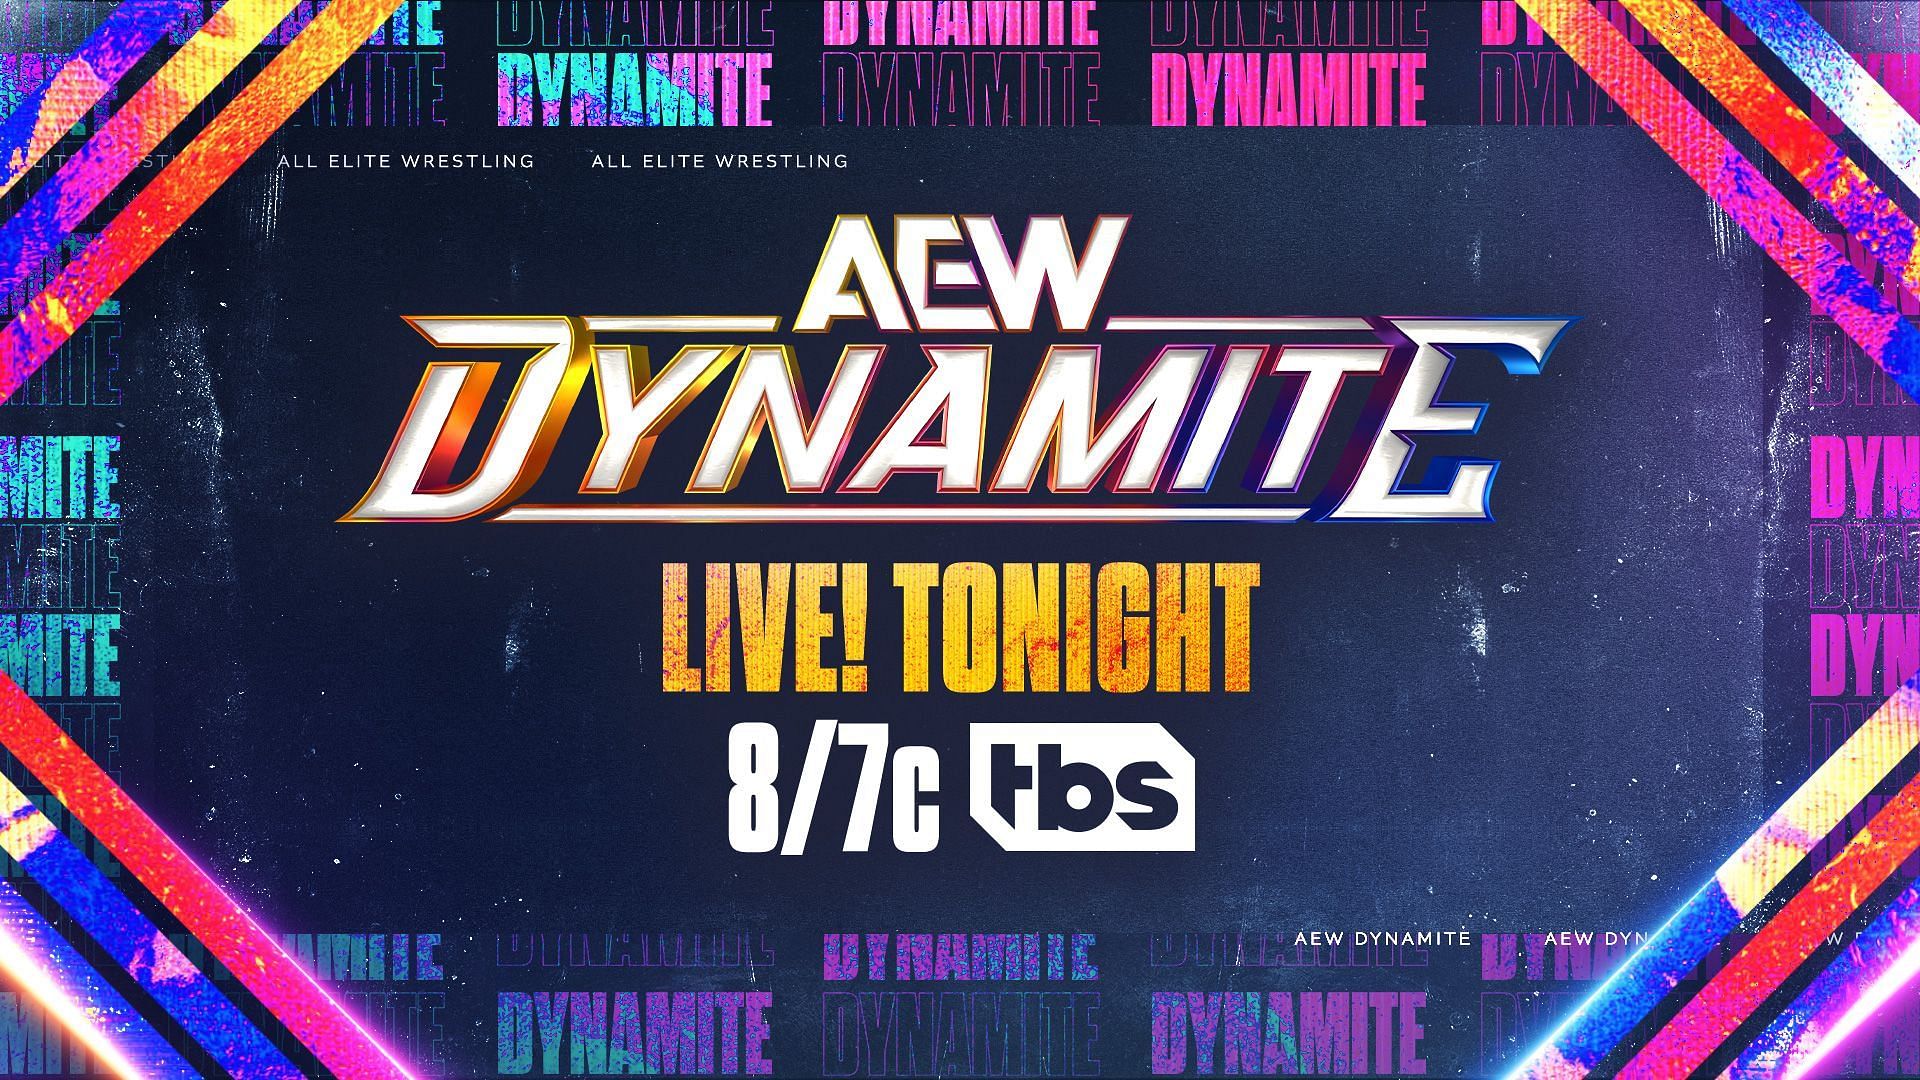 The new official logo for AEW Dynamite